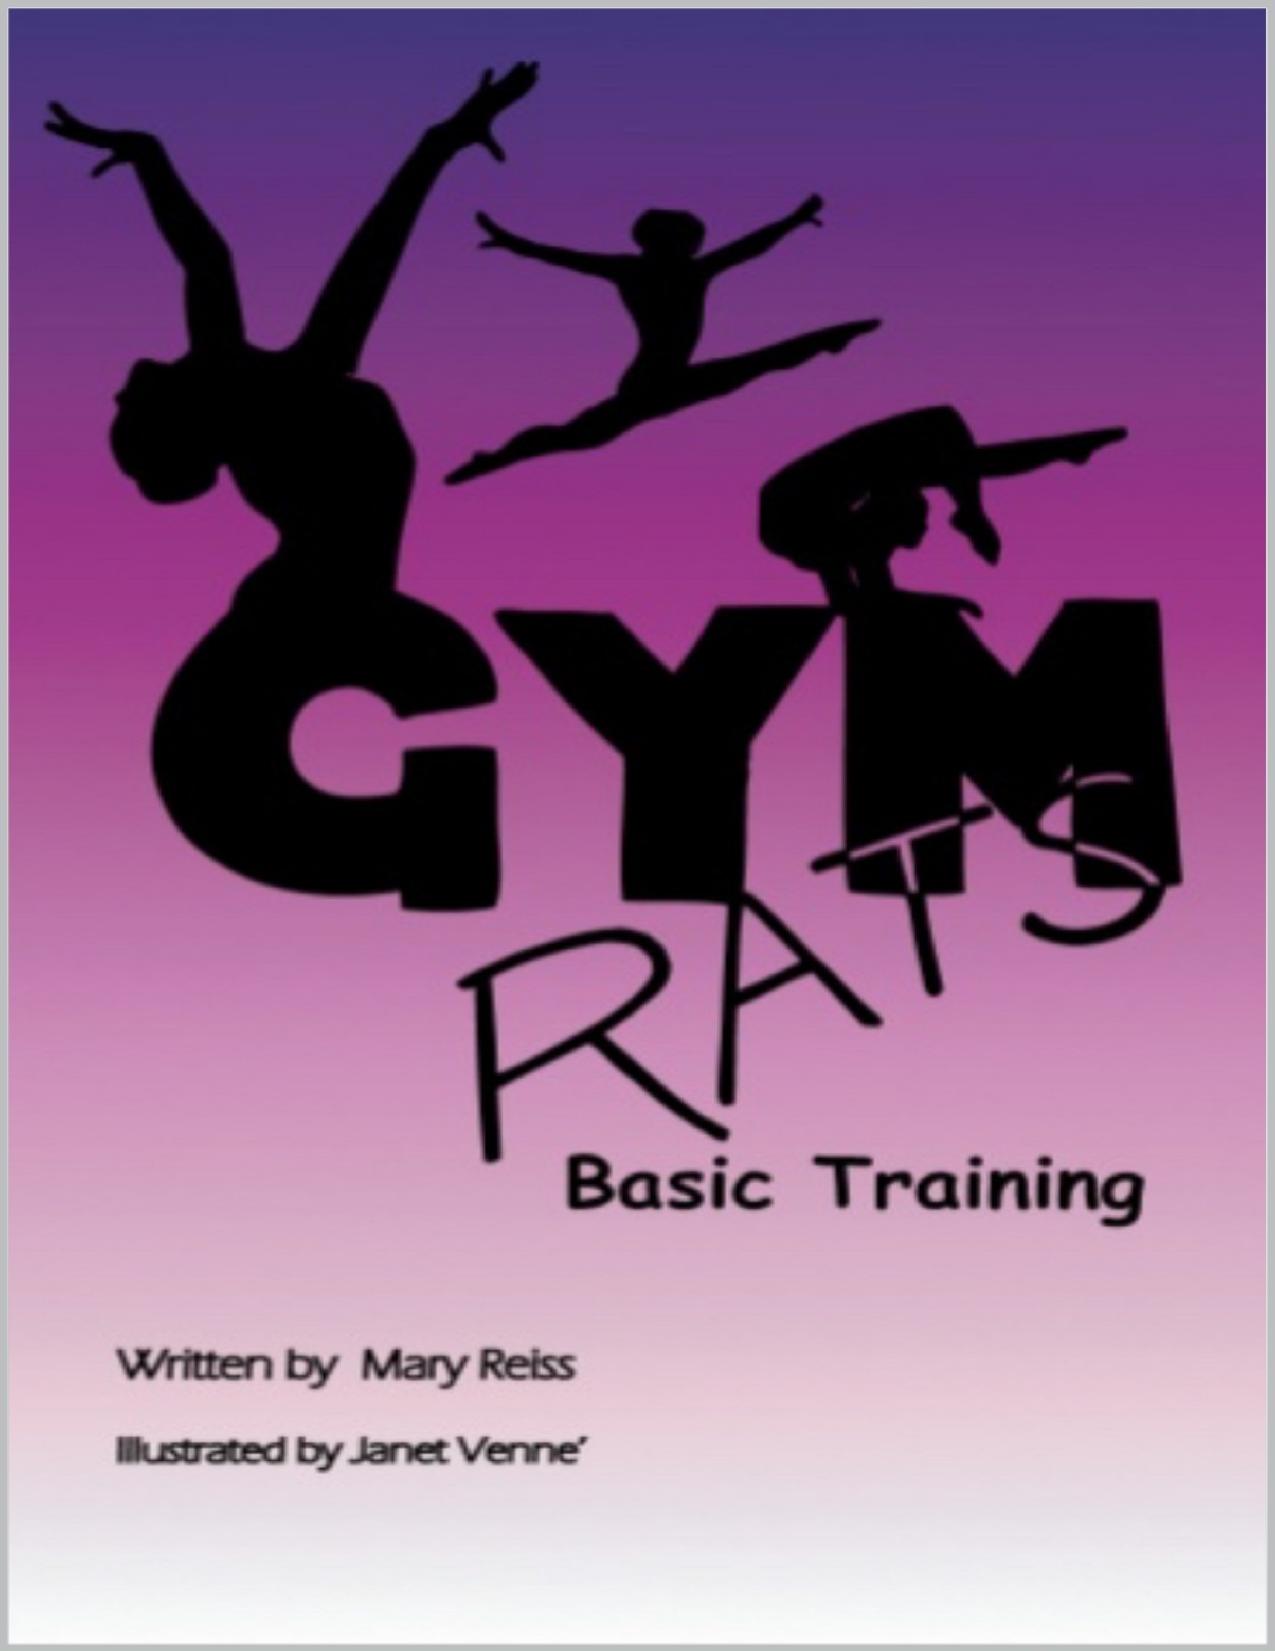 Gym Rats Basic Training: Girls' Gymnastics Book Series with Chapters Teaching Realistic and Valuable Life Lessons by Reiss Farias Mary